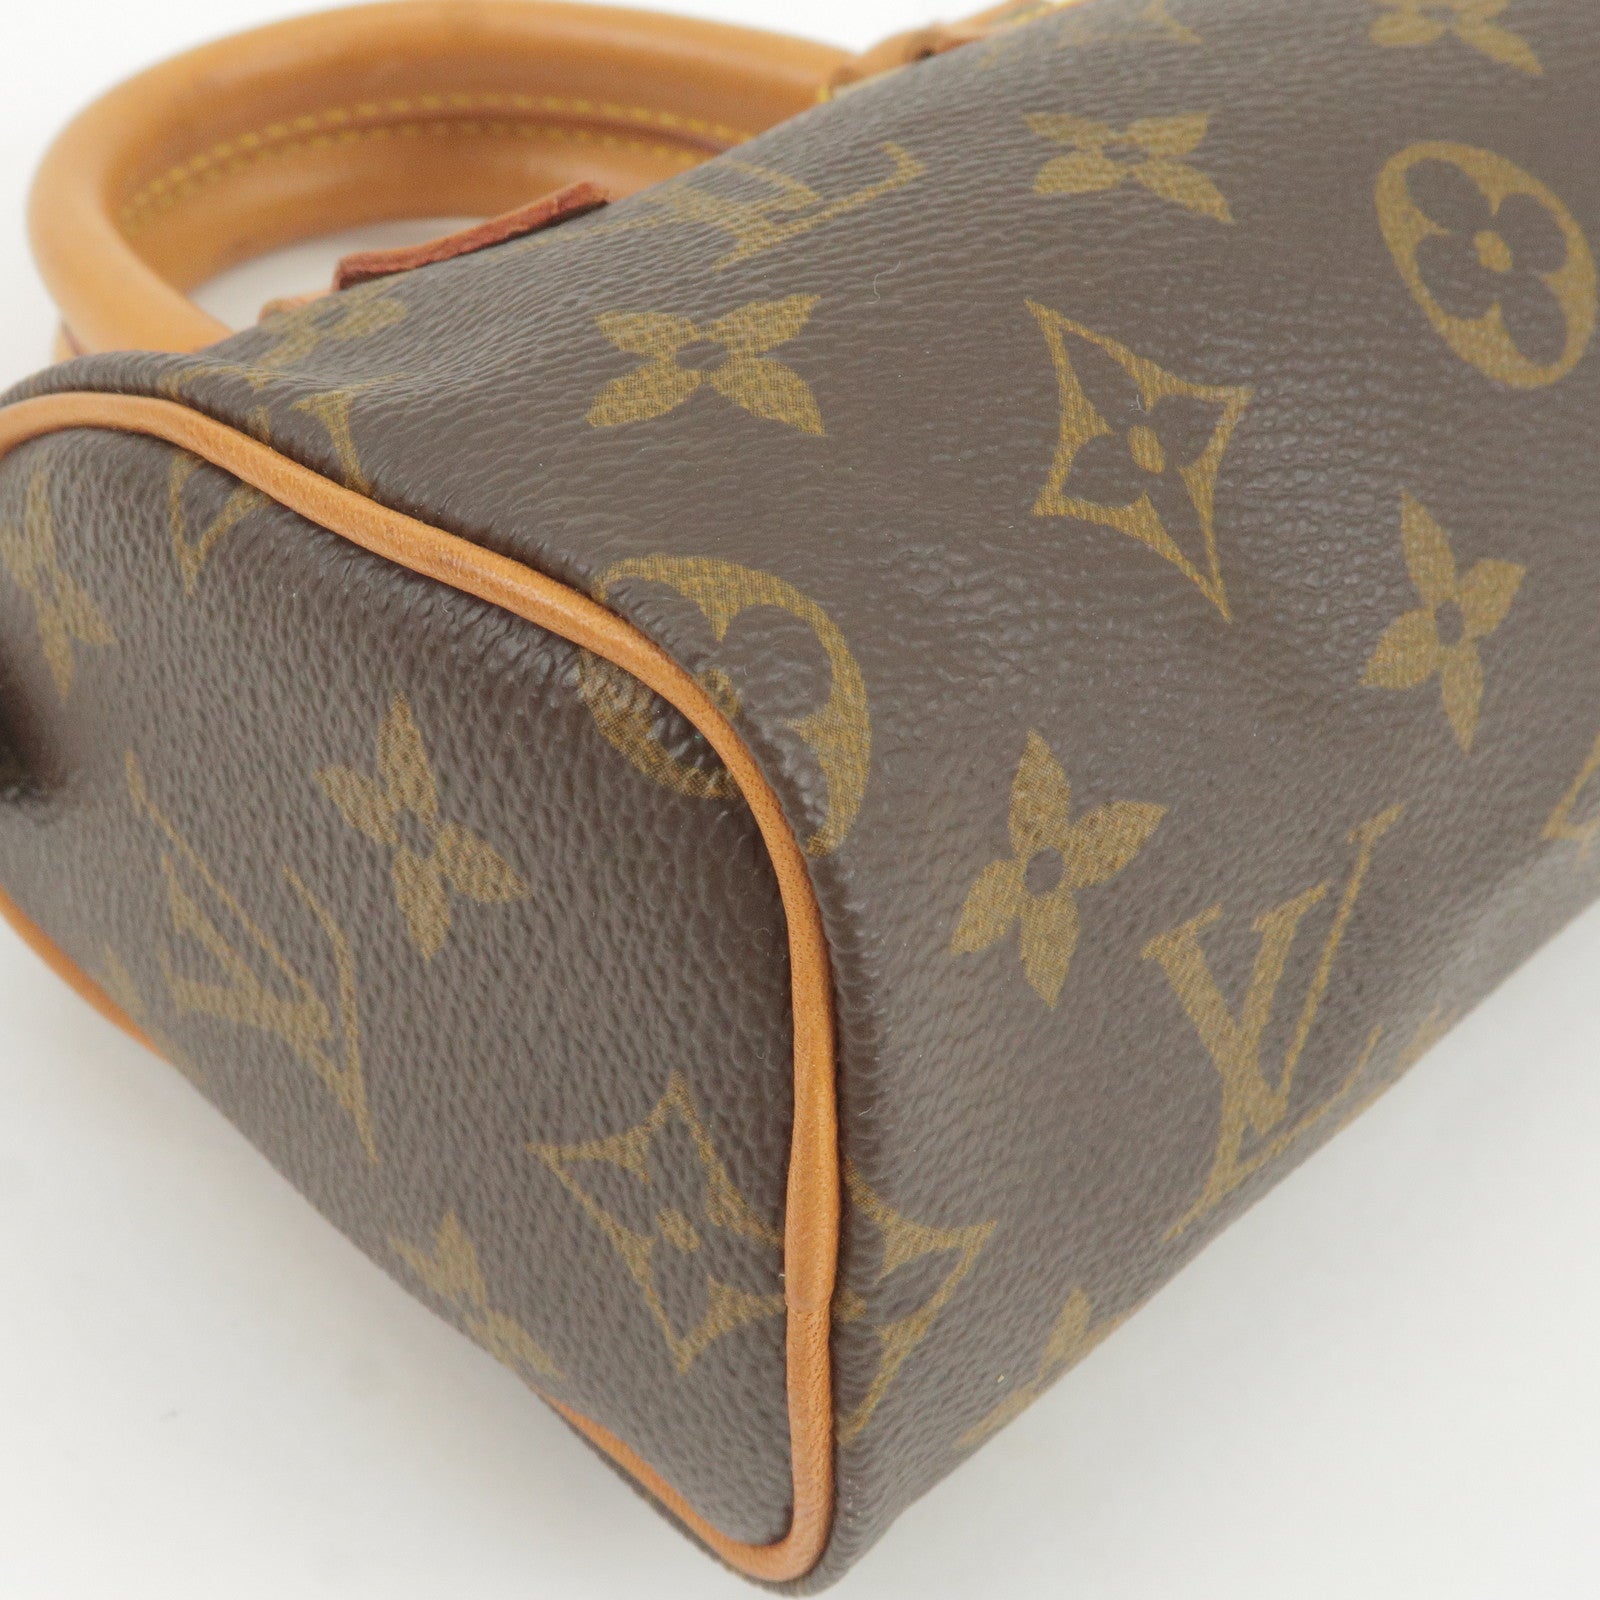 LOUIS VUITTON Limited Edition Speedy North South - Vintage